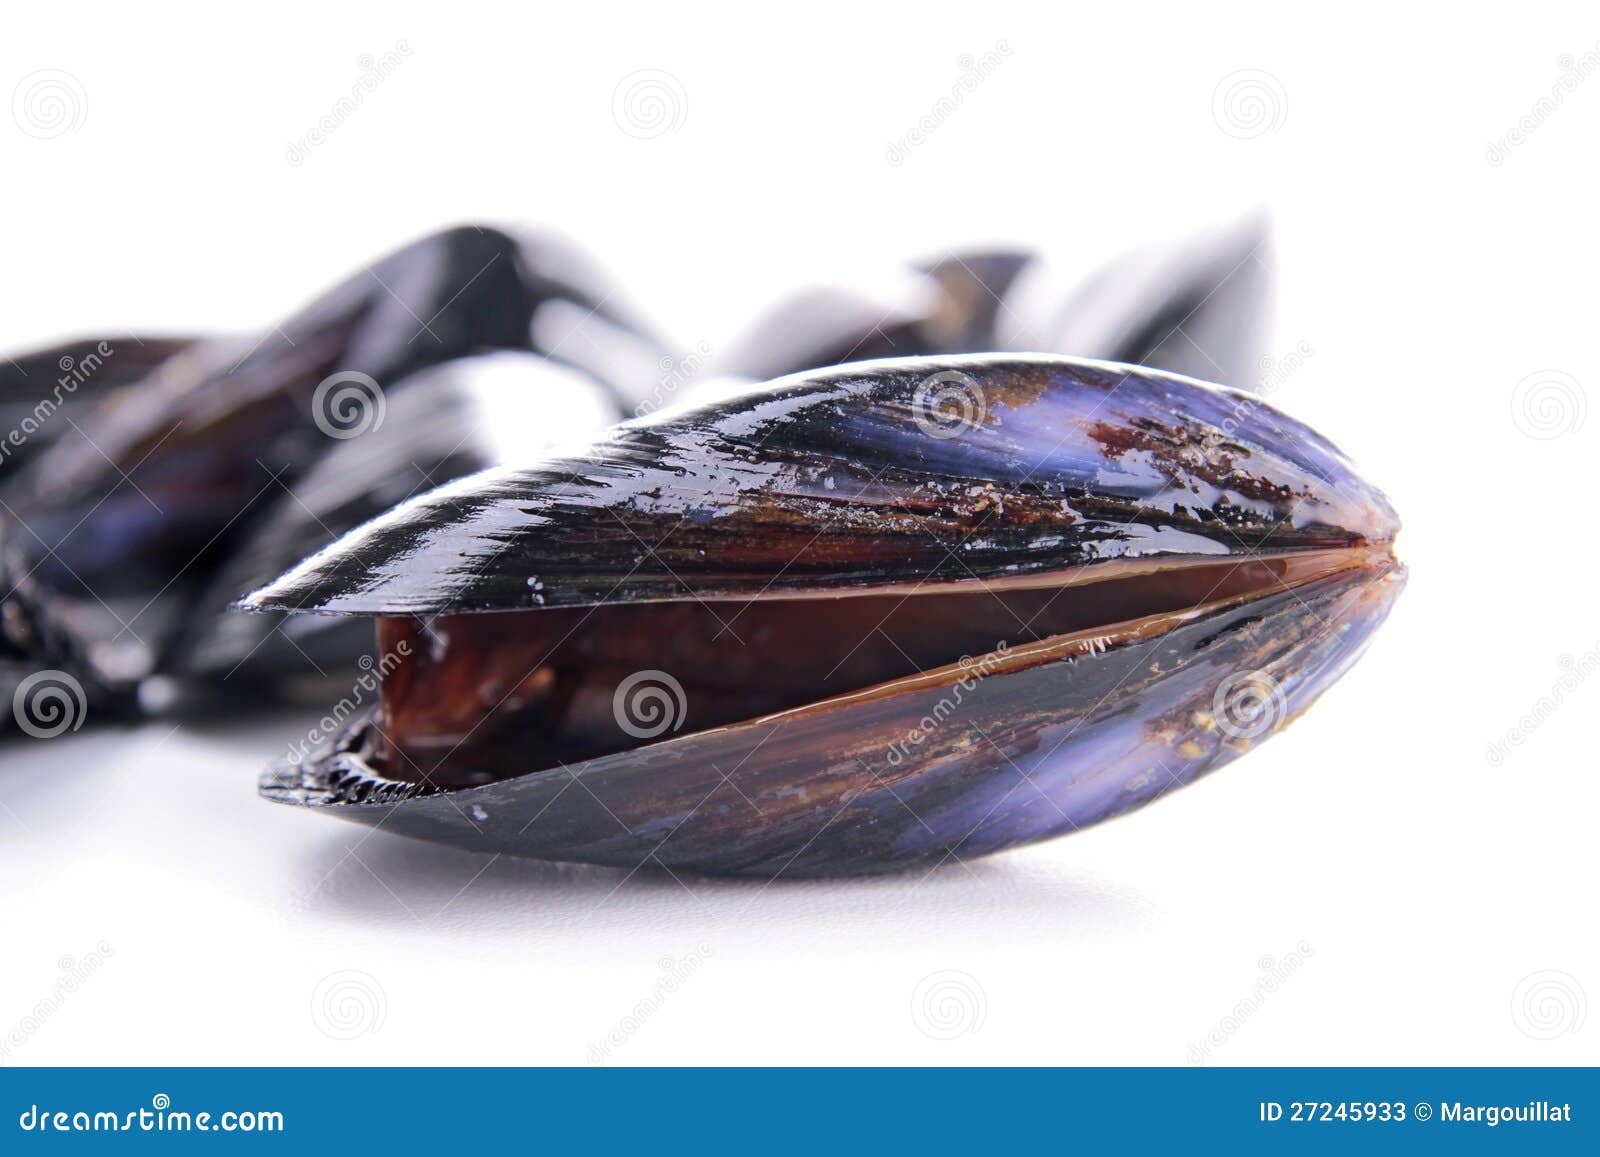 Fresh Raw Mussel Stock Image Image Of Boiled Mussel 27245933